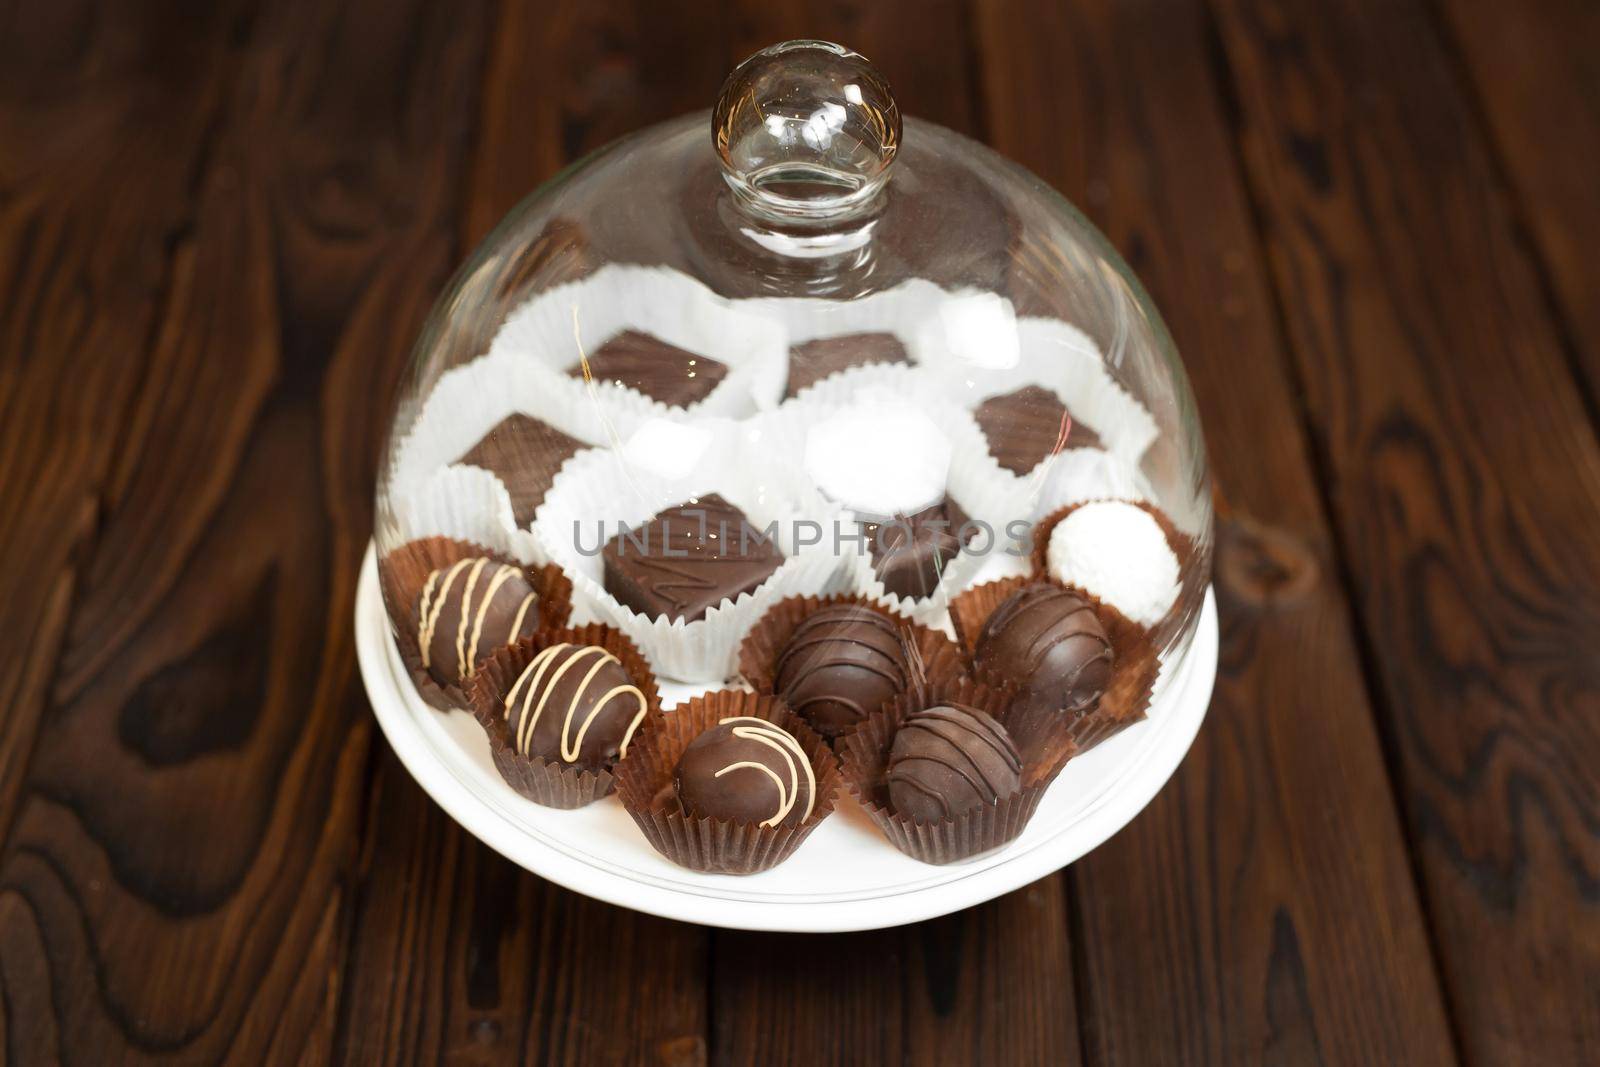 Handmade chocolates on a tray under a glass cover.